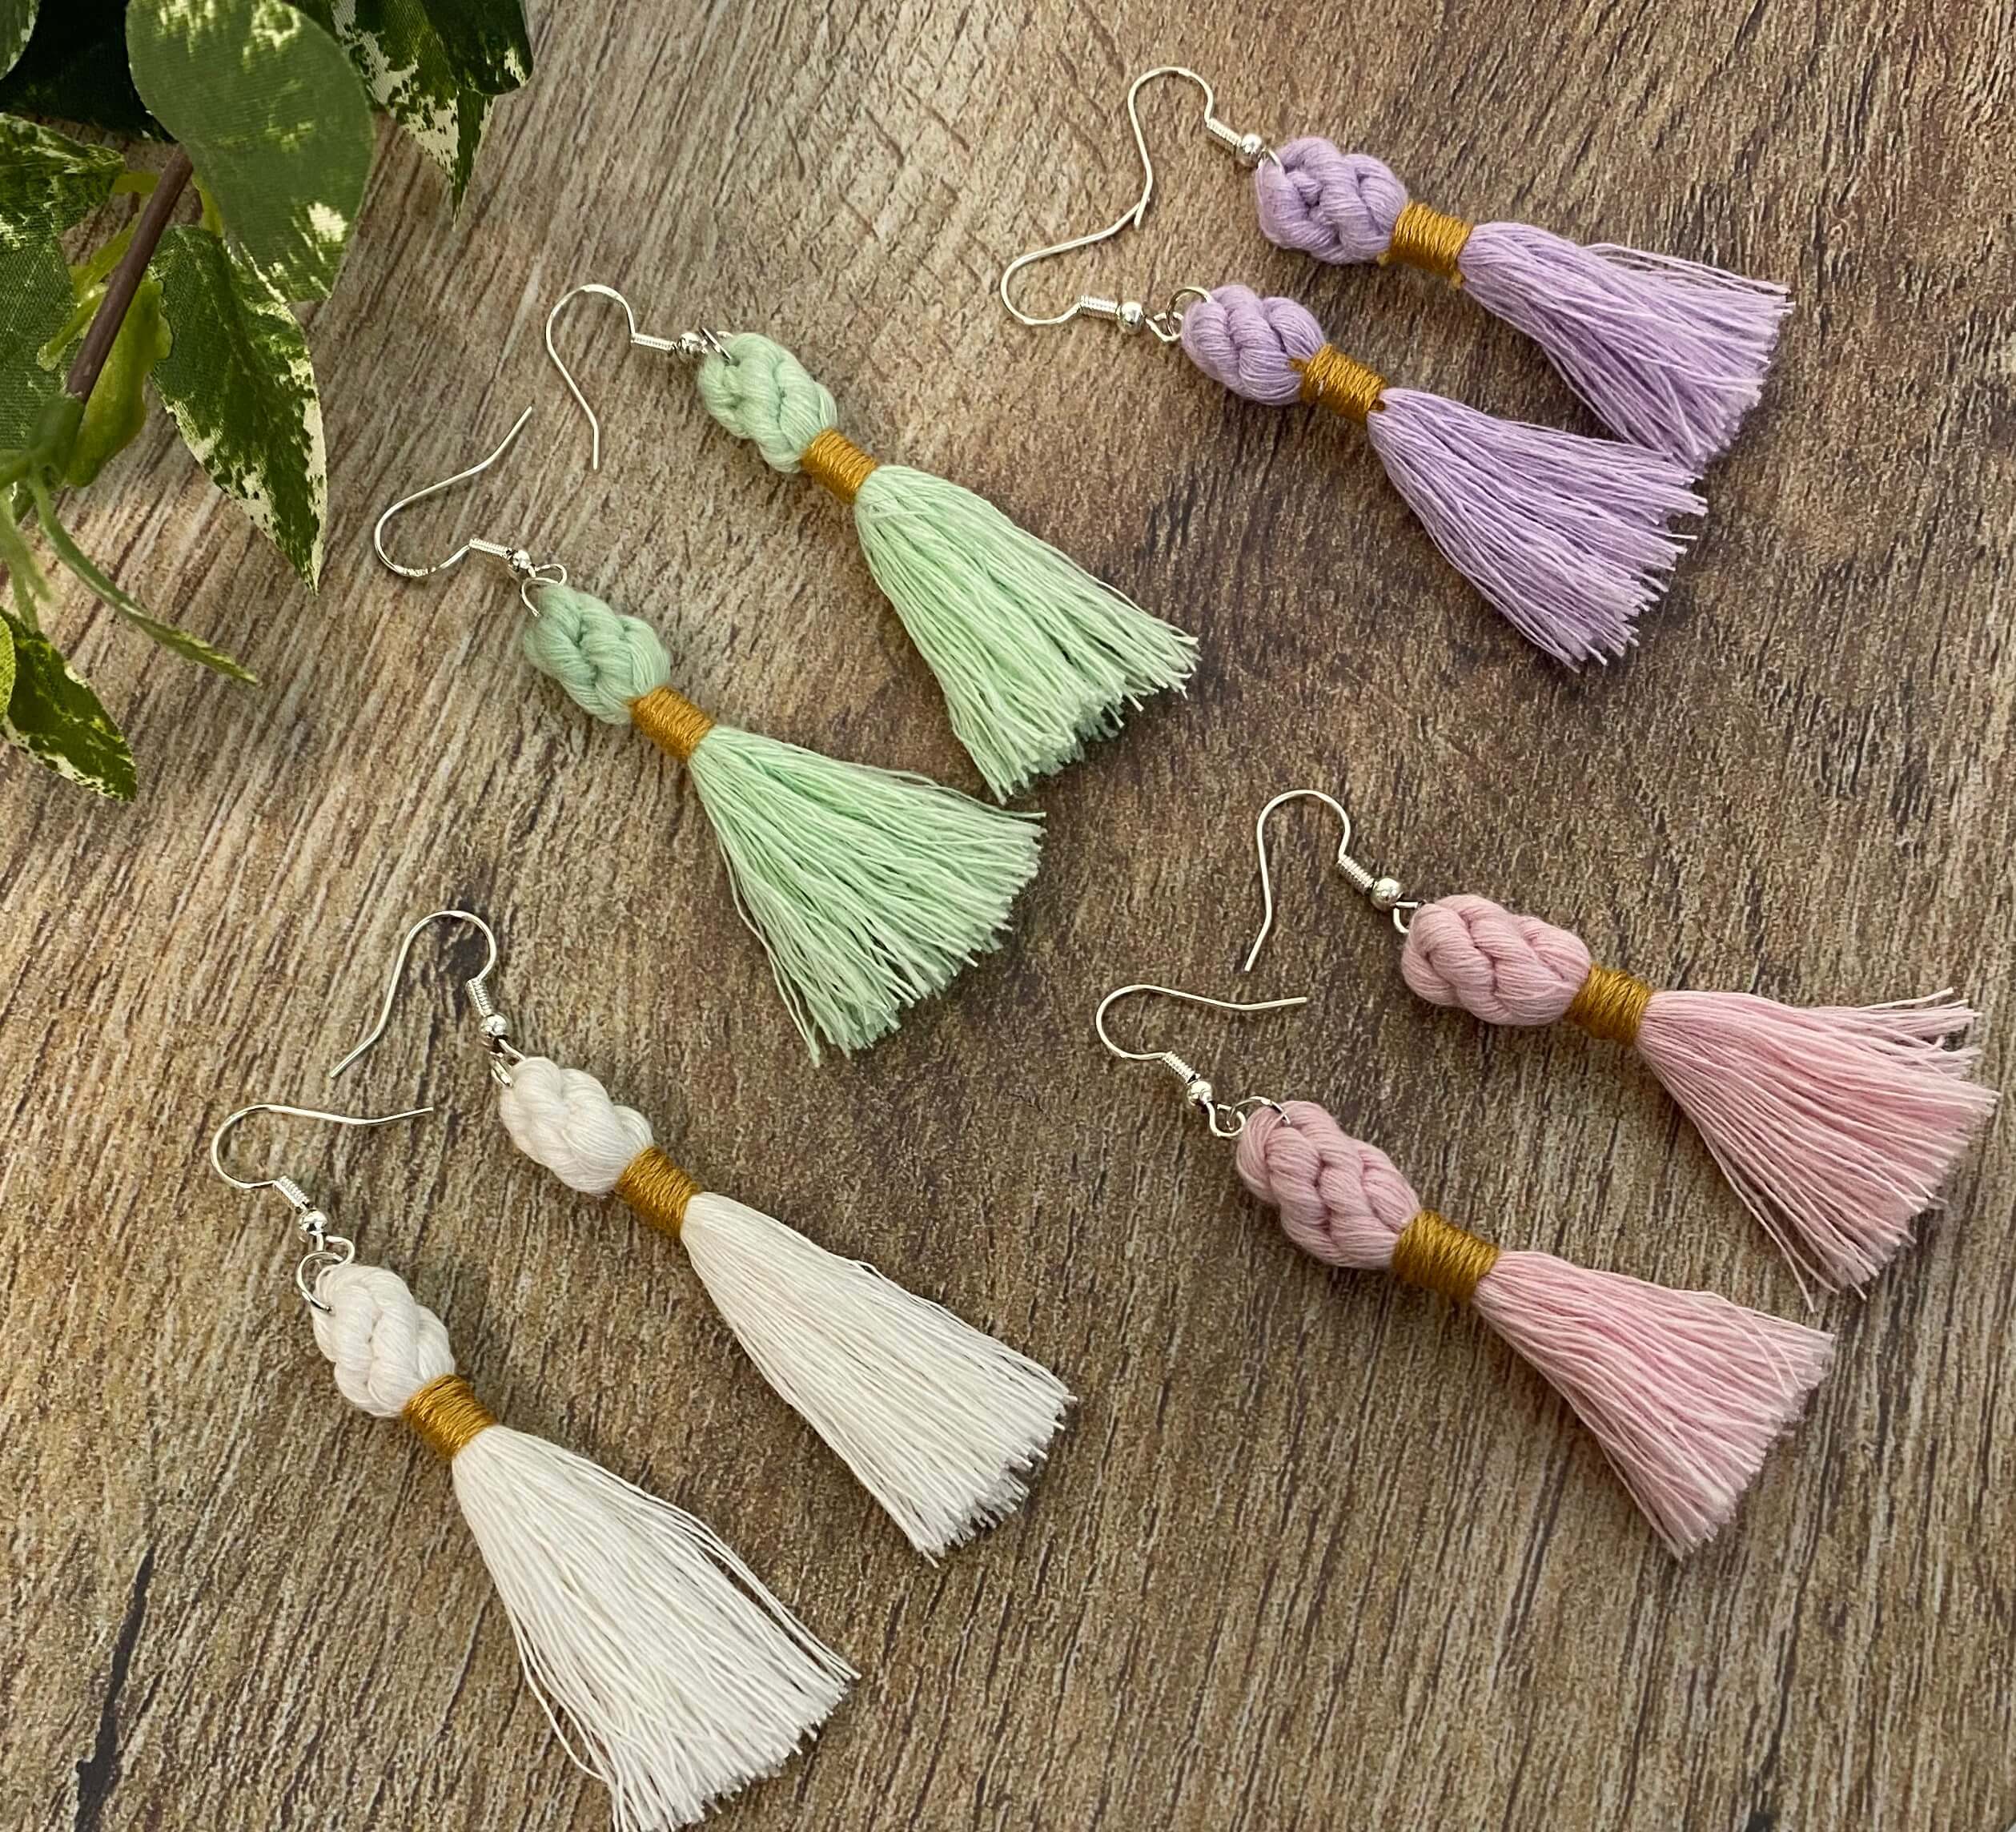 Xanthi-Elena Jewelry - 《Macrame Bat Earrings》⁠ .⁠ 🏷 Available €30 🛍  Littlefoxystrinkets.etsy.com⁠ .⁠ Did you catch this design on my shop? I  made these bat earrings last year and sold out! This